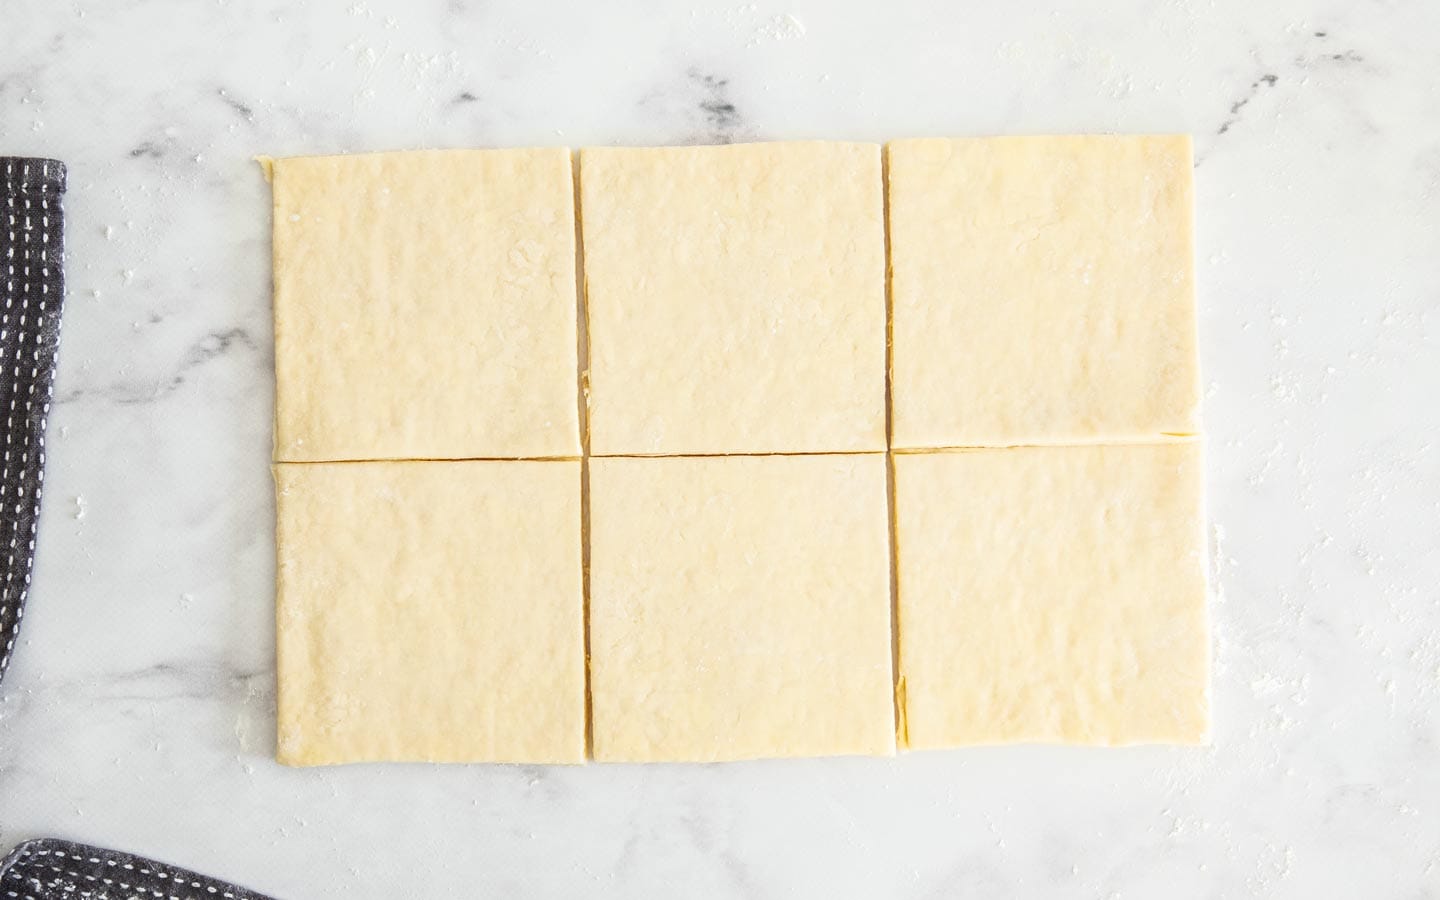 The pastry cut through the middle to make 6 squares.